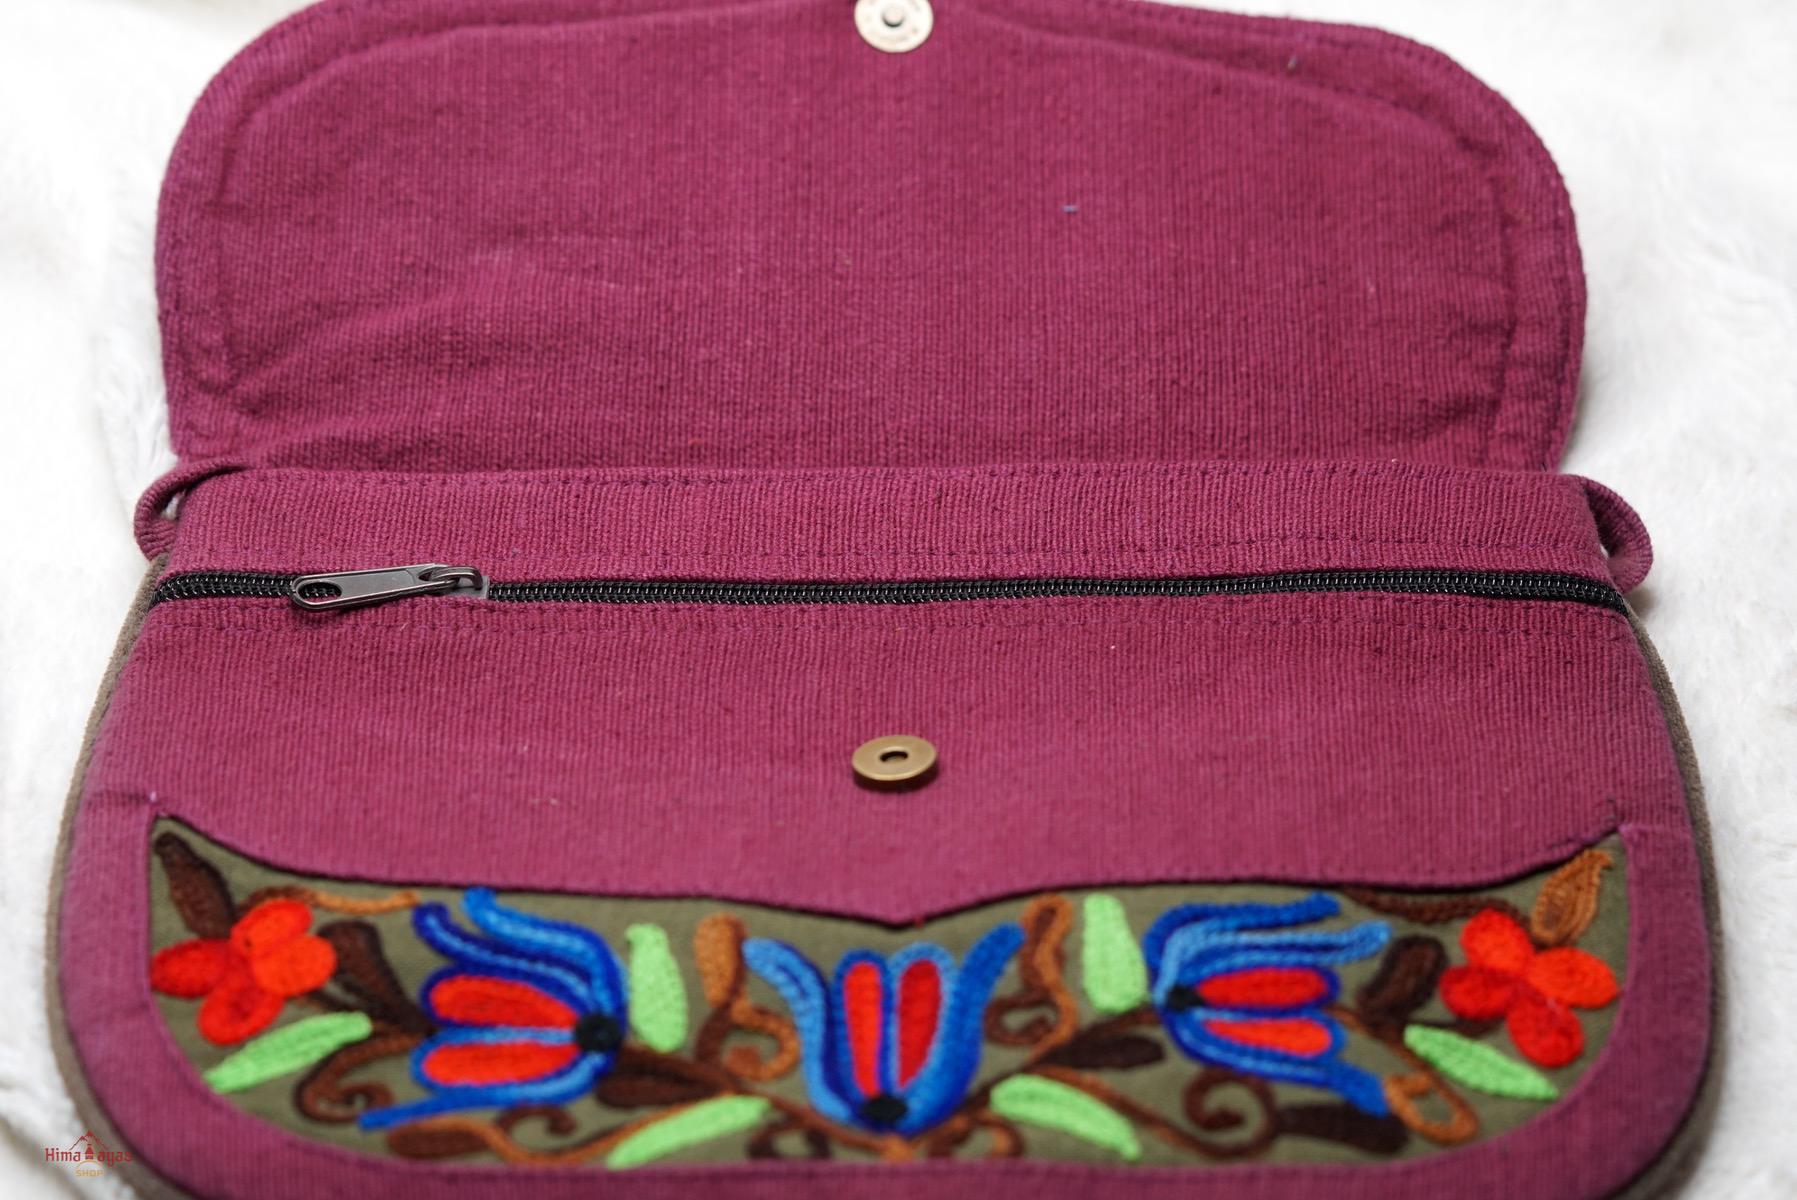 A unique style eco-friendly women's crossbody bag with hand embroidery, crafted ethically from Himalayas.